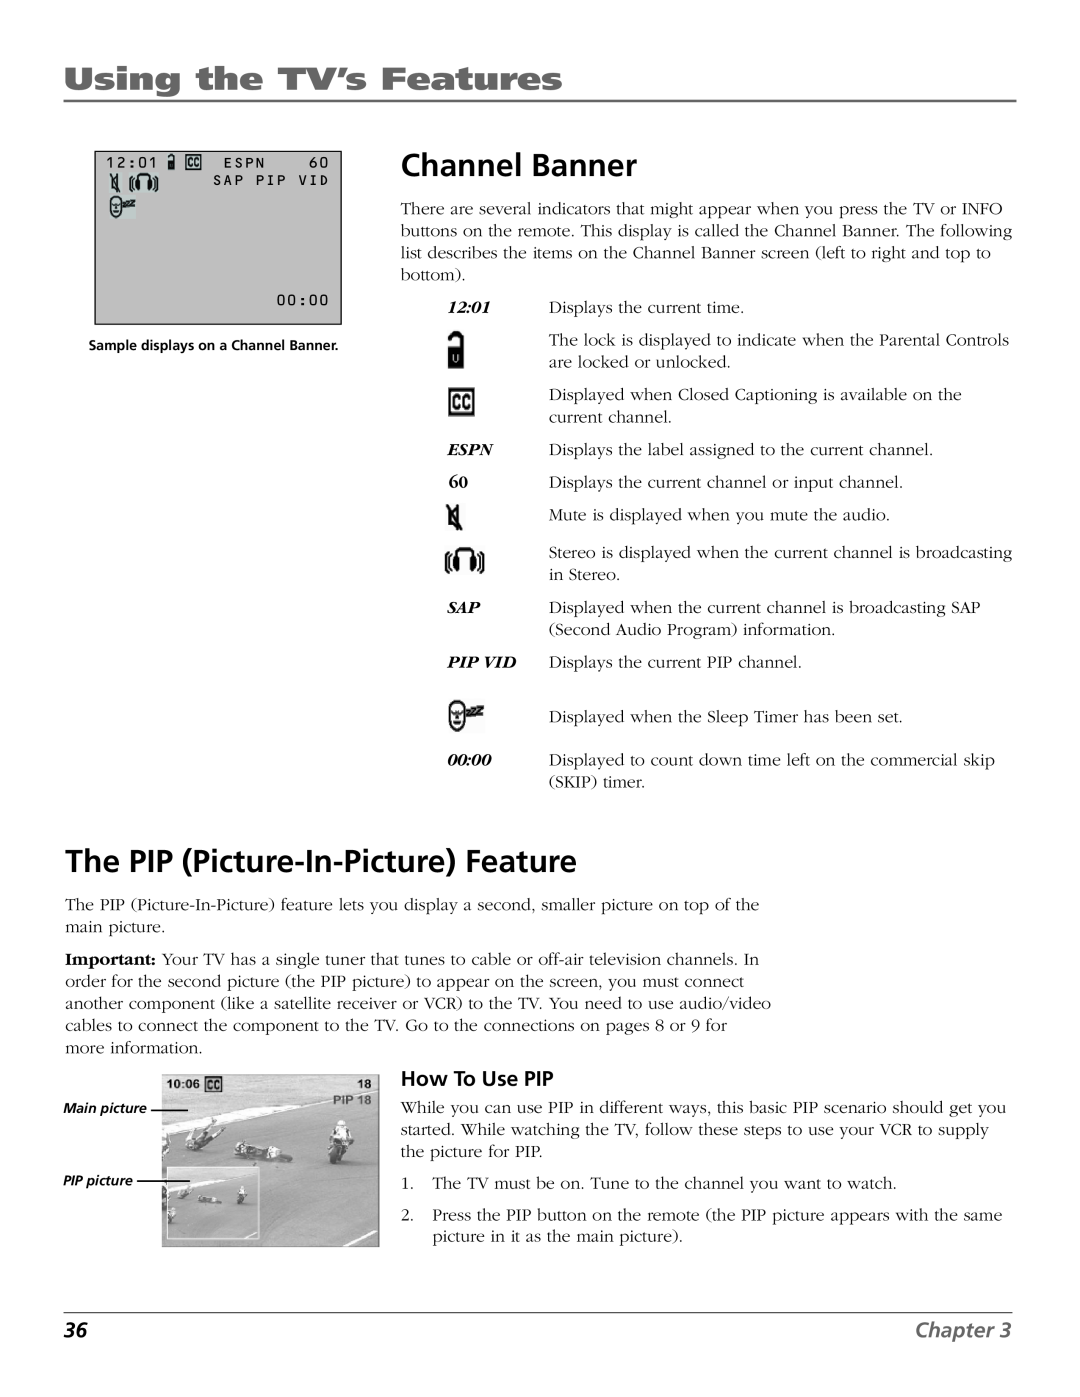 RCA F27669 manual Channel Banner, The PIP Picture-In-Picture Feature, Using the TV’s Features, How To Use PIP, Chapter 